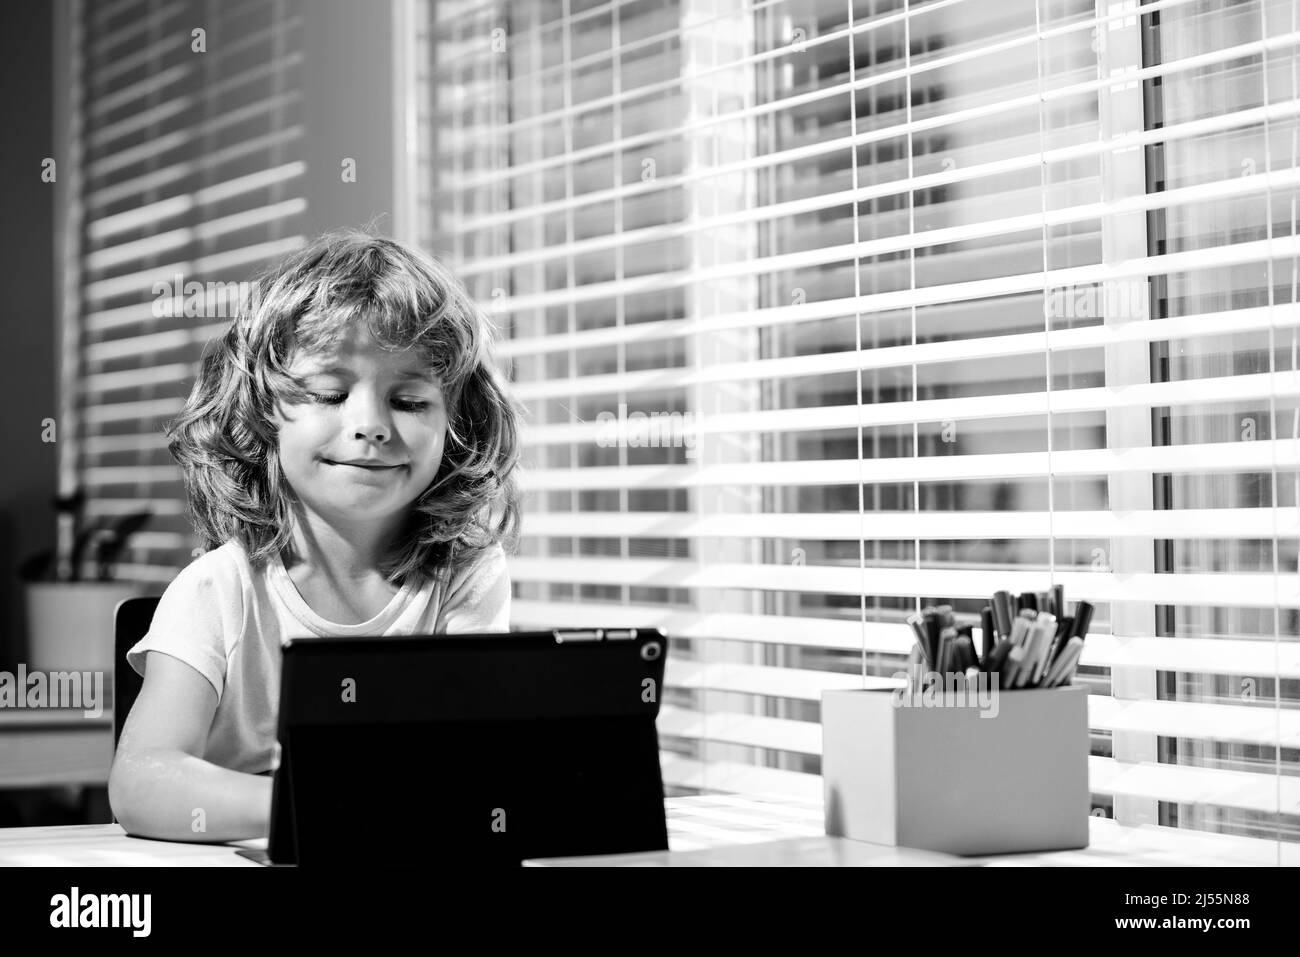 The kid boy ready to answer the online teachers question. E-learning, homeschool and online education for kids. Stock Photo